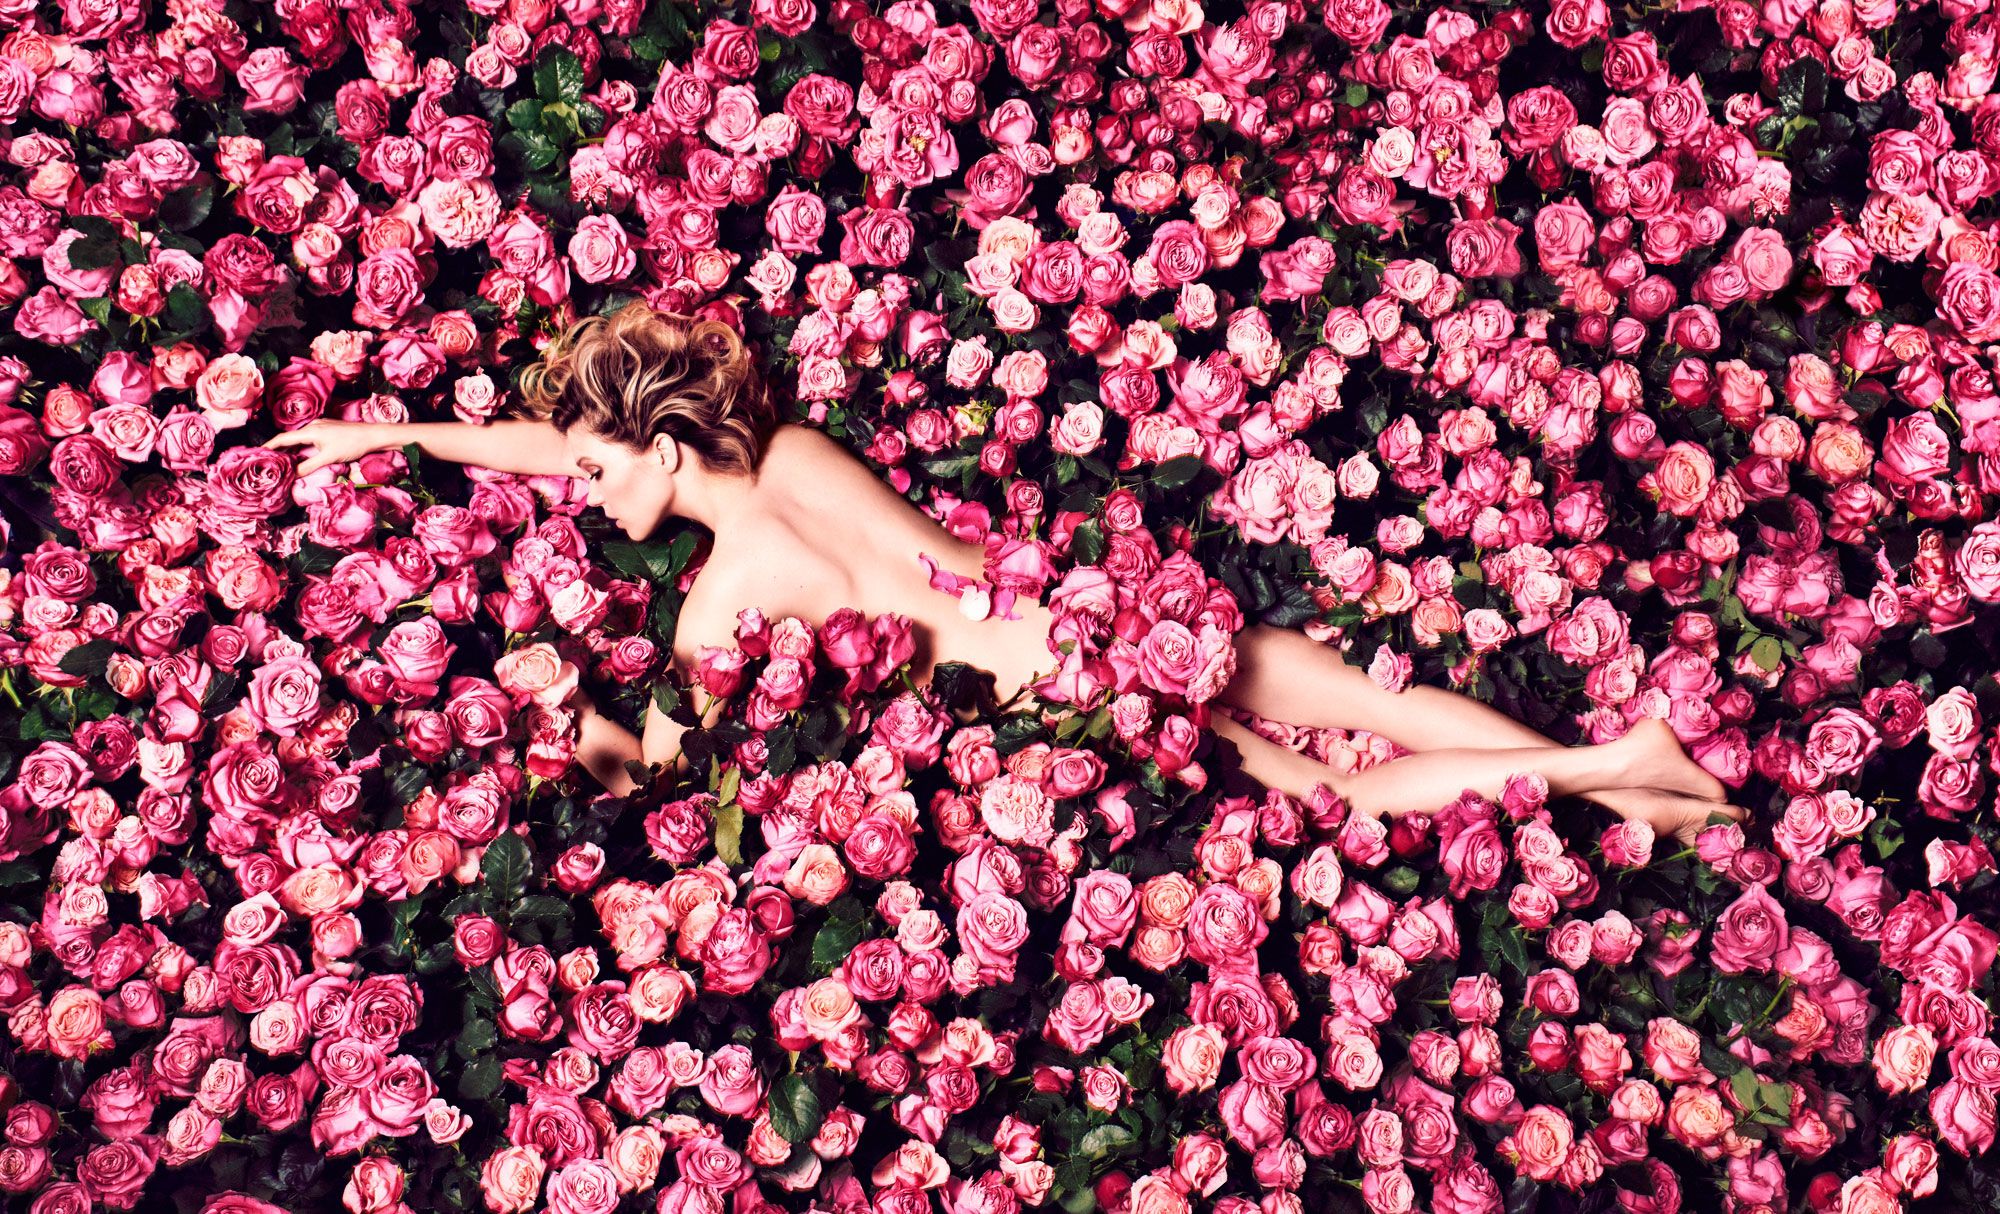 Louis Vuitton on X: World of Fragrances. From the flower fields